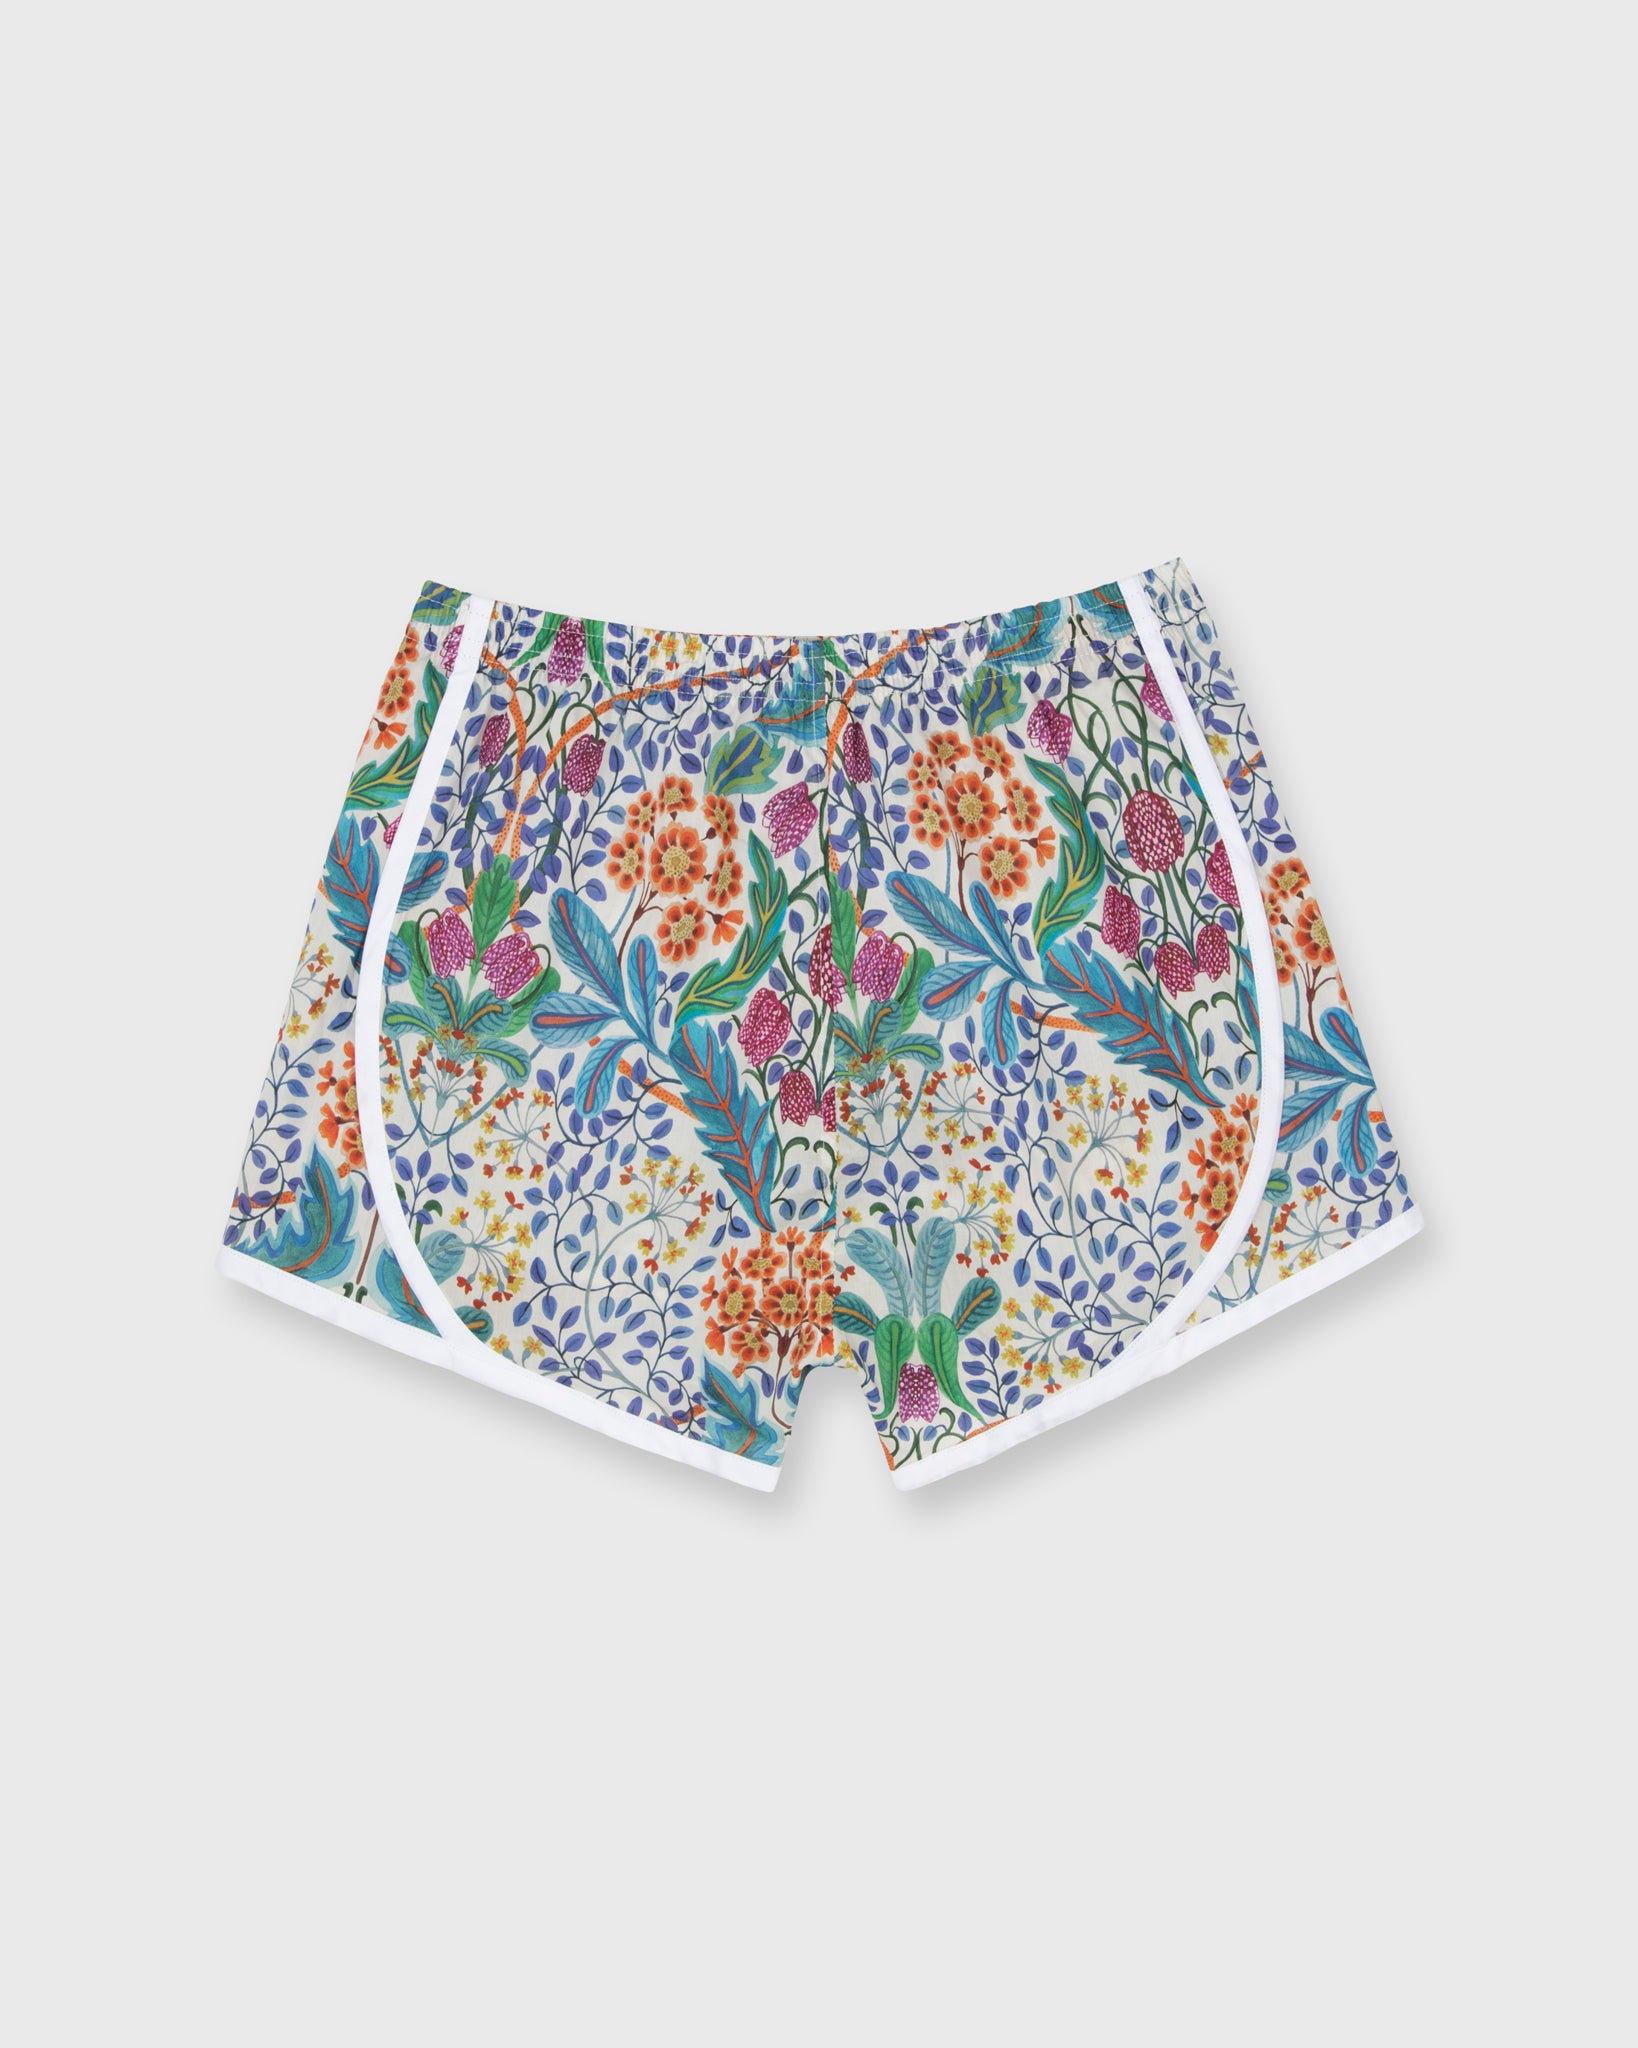 Track Short in Ivory Multi Elm House Liberty Fabric